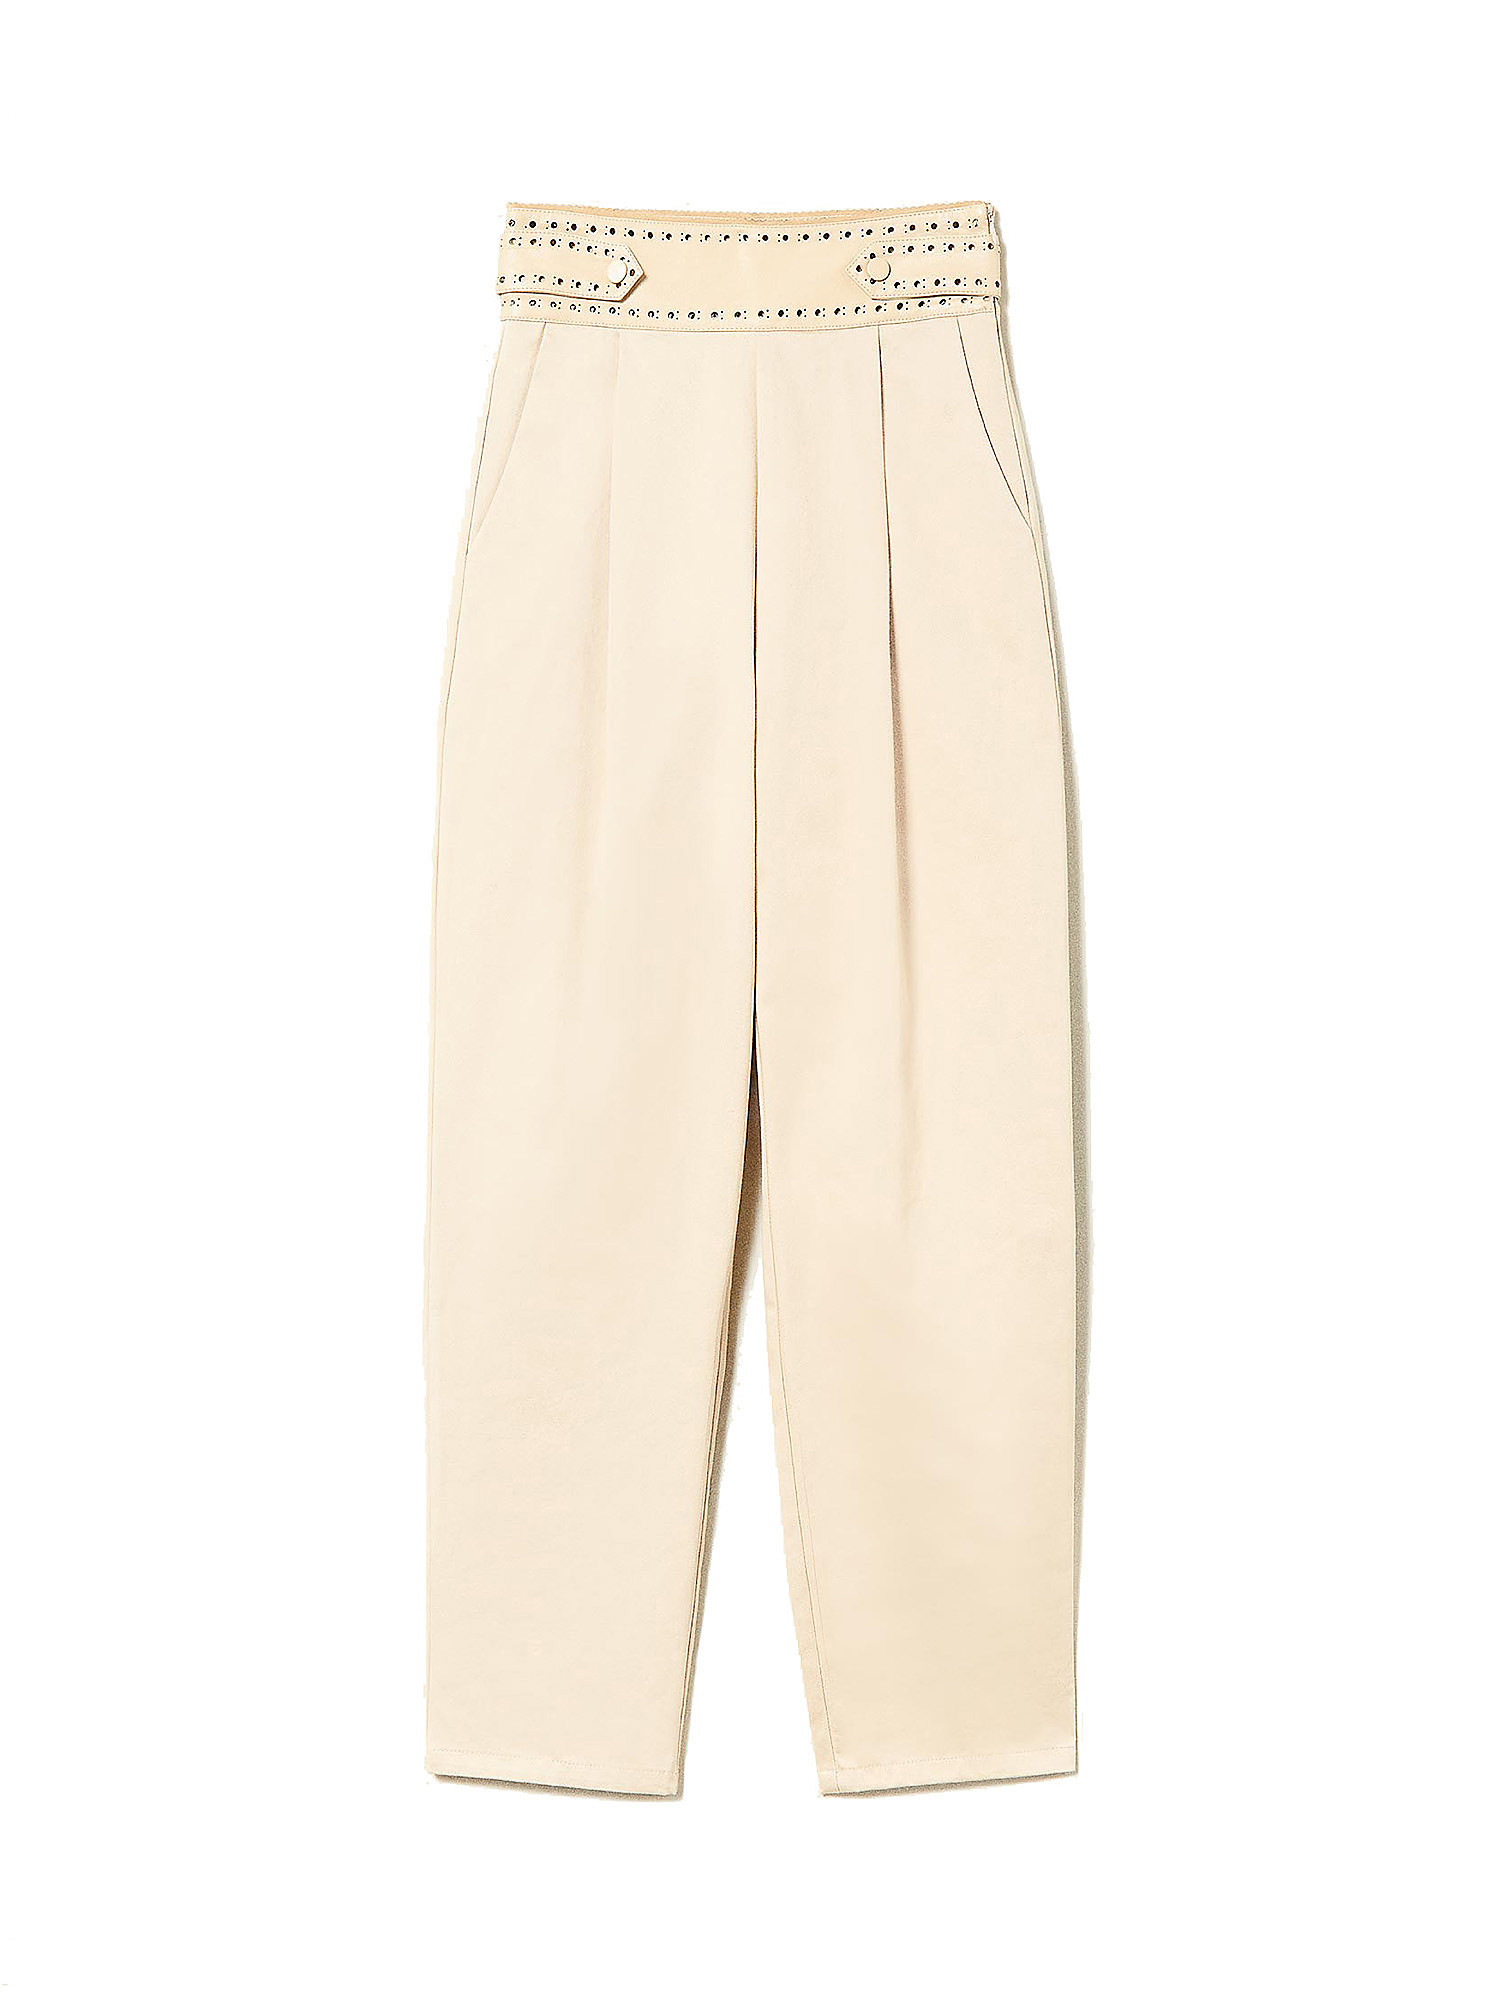 Trousers with openwork embroidery, Cream, large image number 0